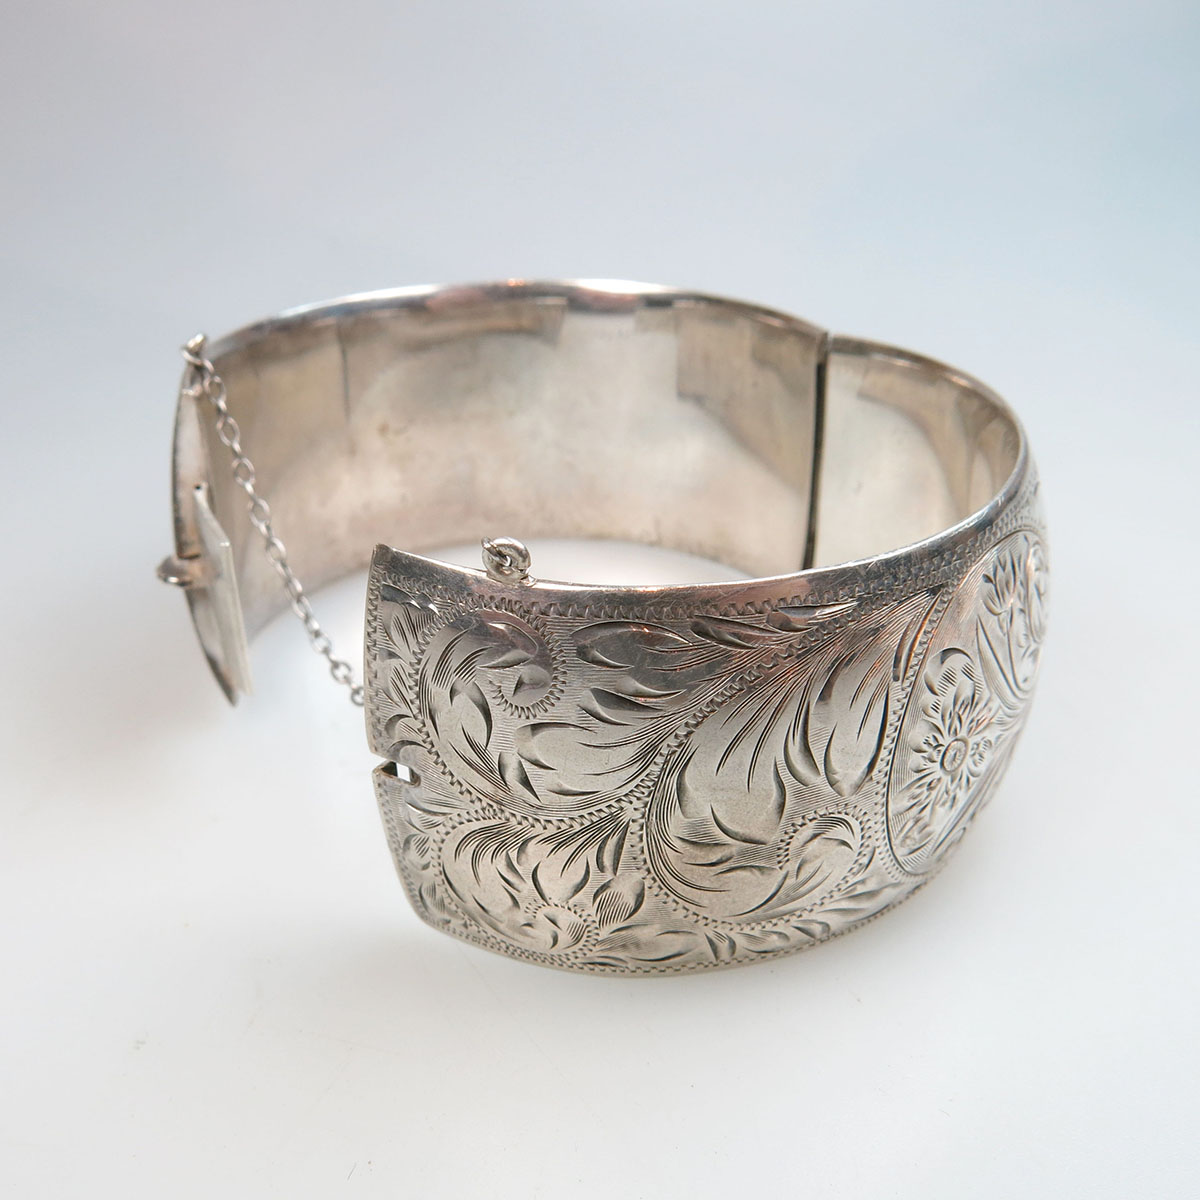 Birk’s Sterling Silver Hinged Bangle